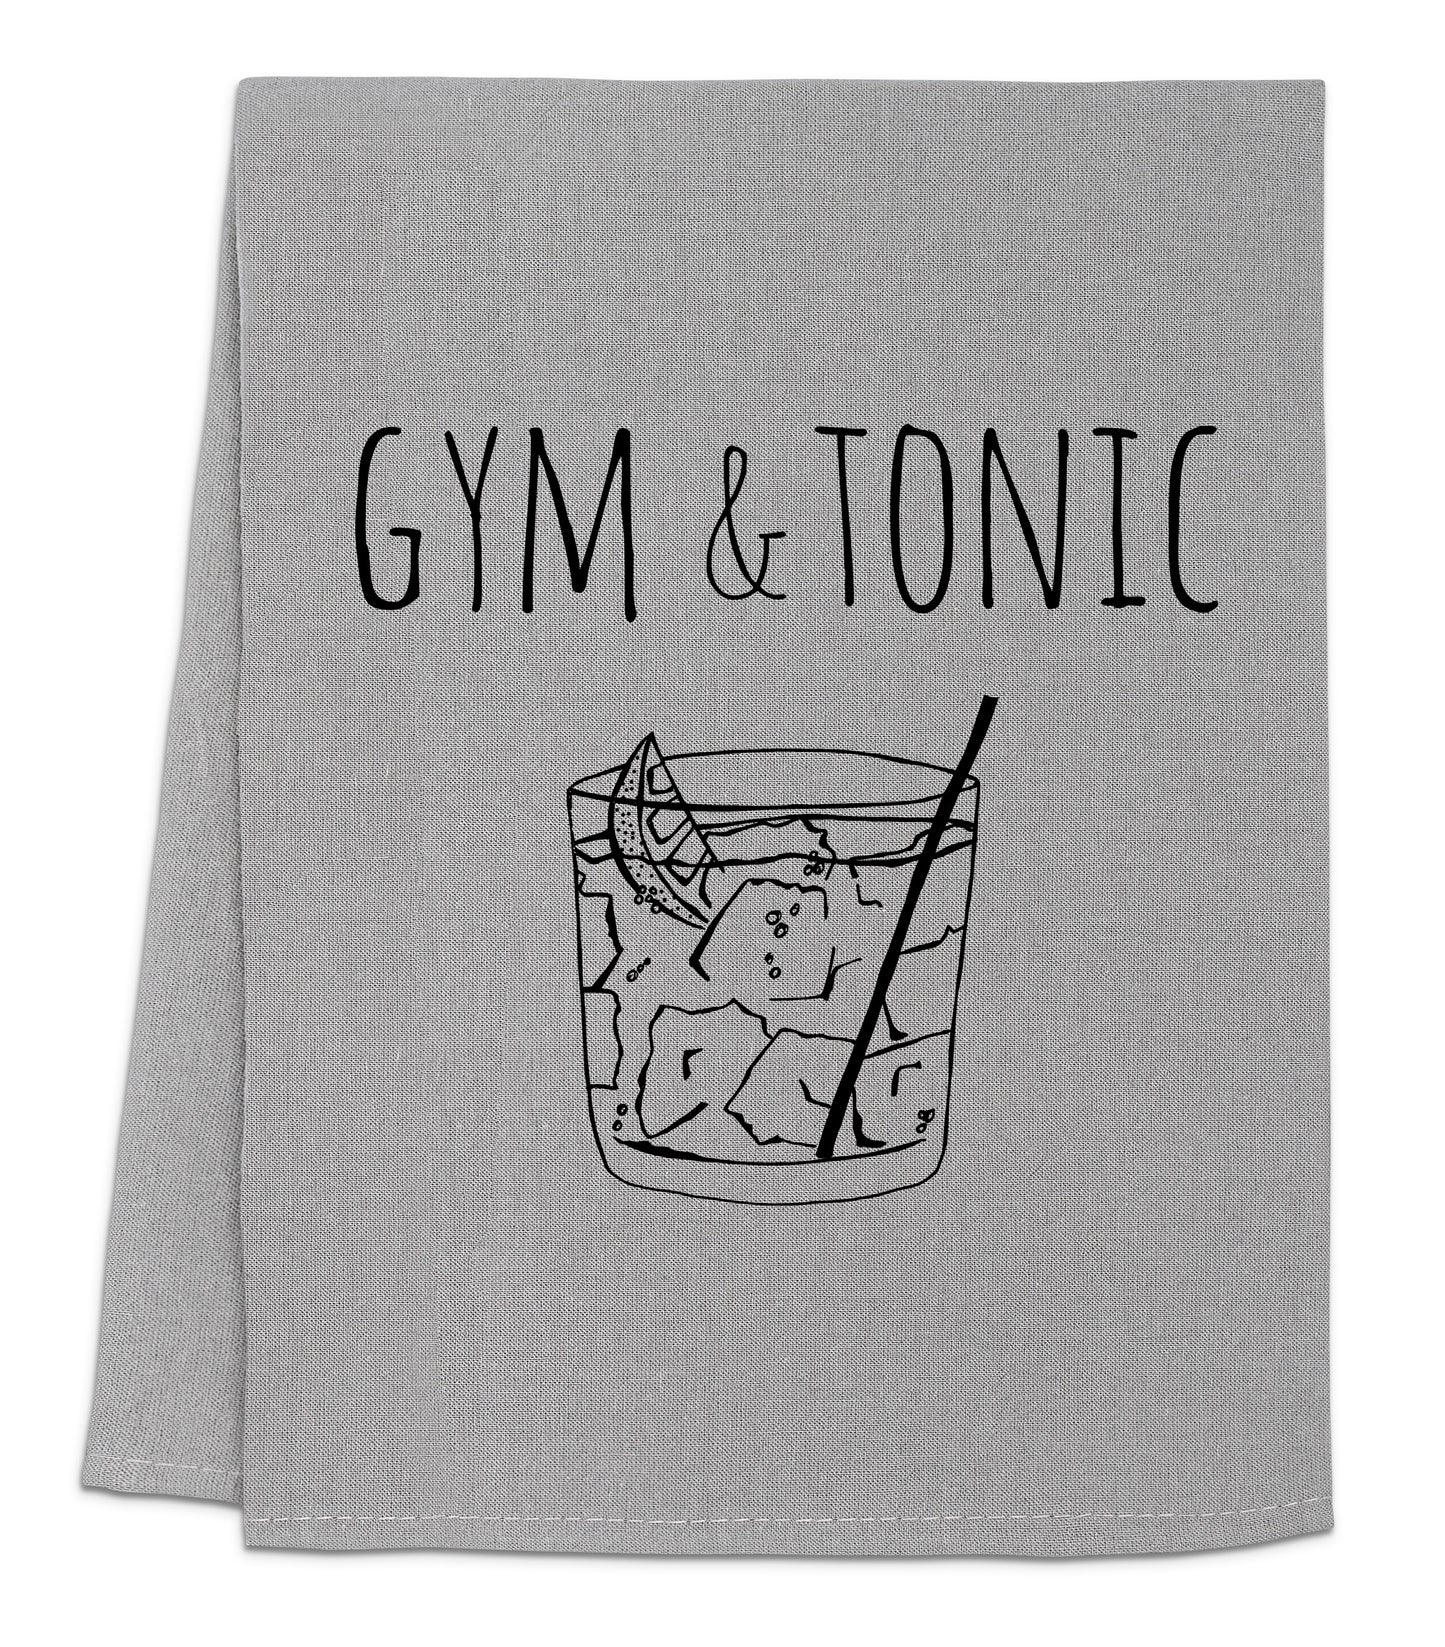 a towel that says gym and tonic on it